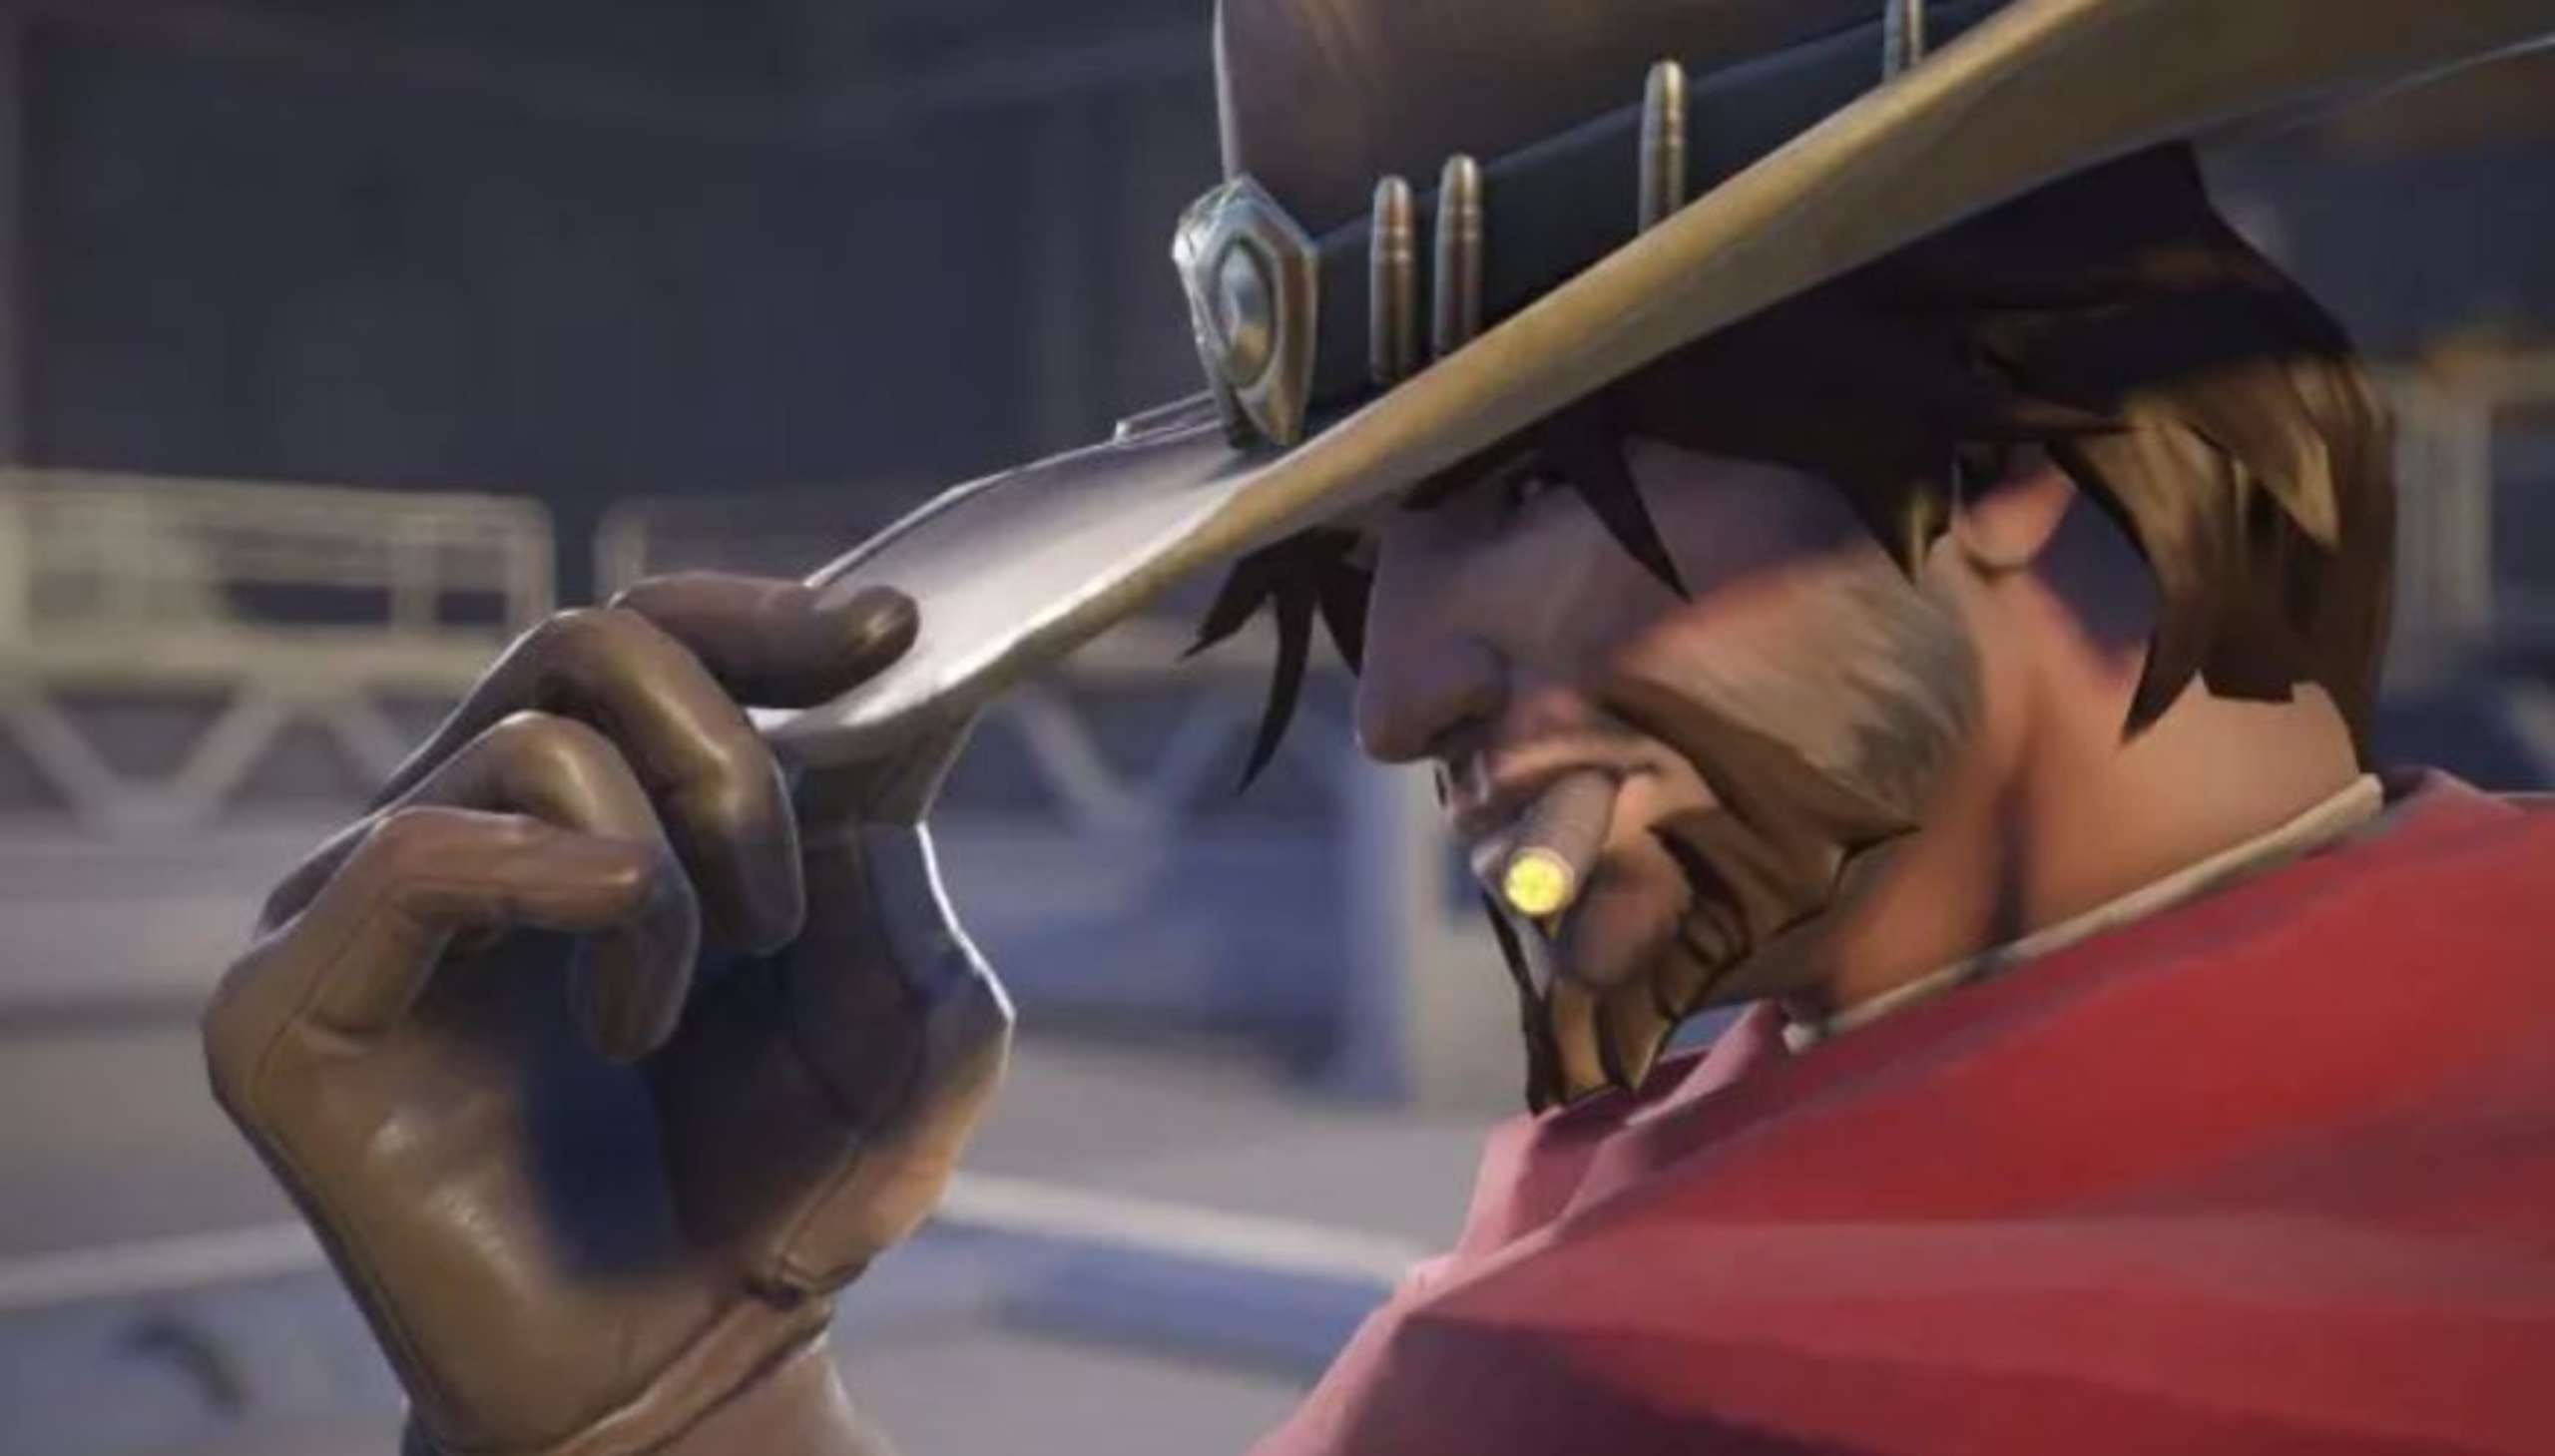 In Overwatch 2, Some Gamers Are Concerned That Cassidy’s New Magnetic Grenade May Be Too Strong